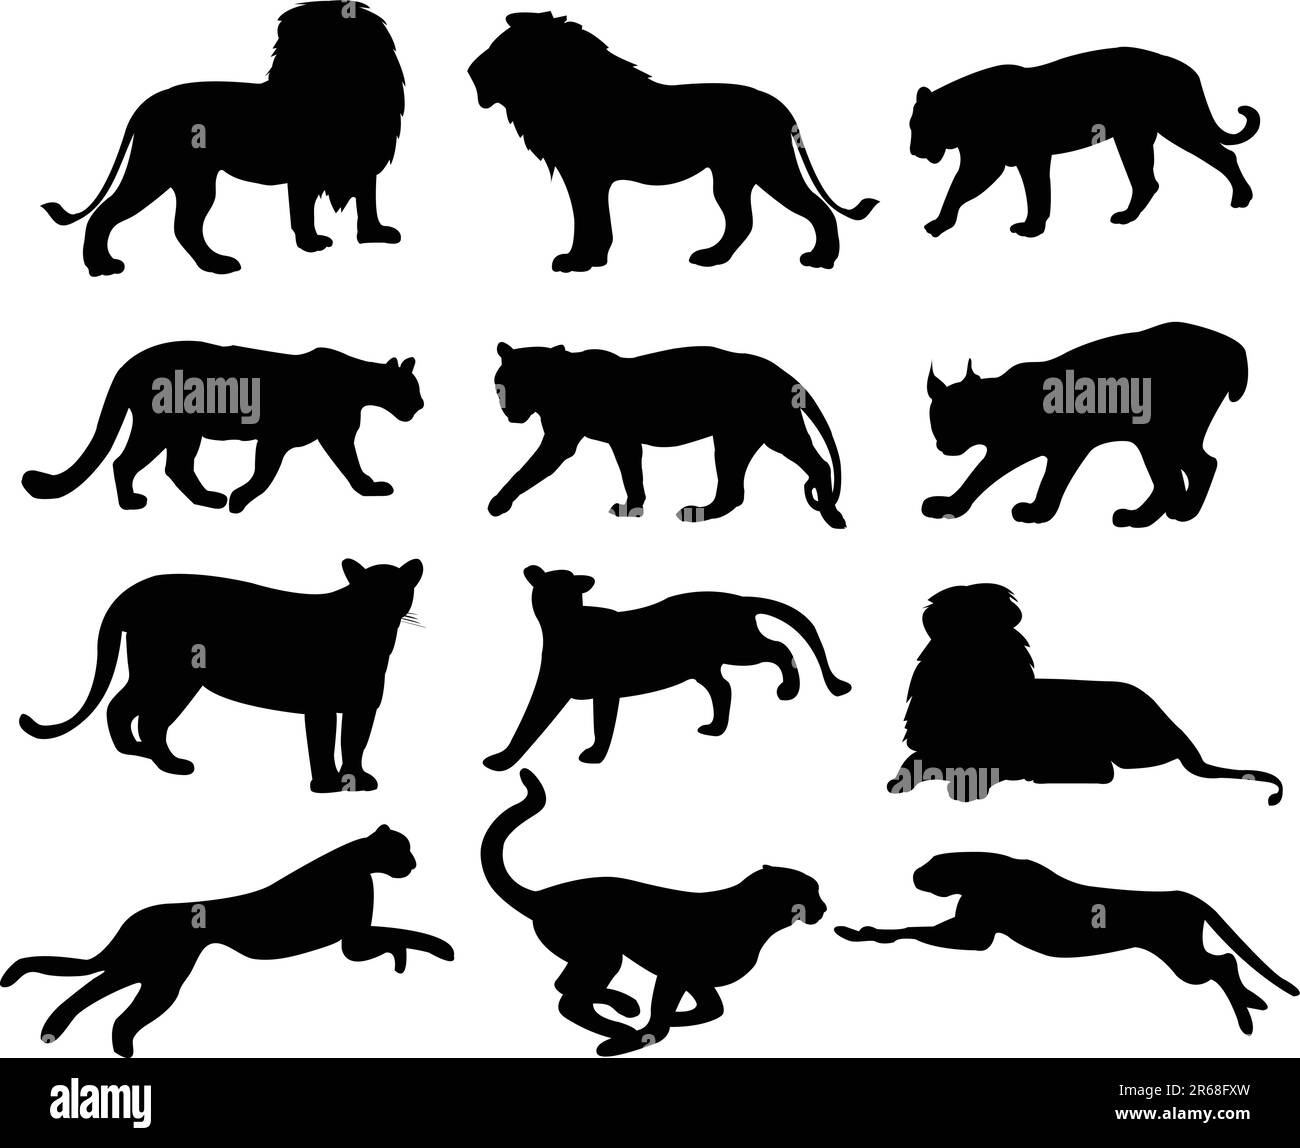 big cats silhouette collection - vector Stock Vector